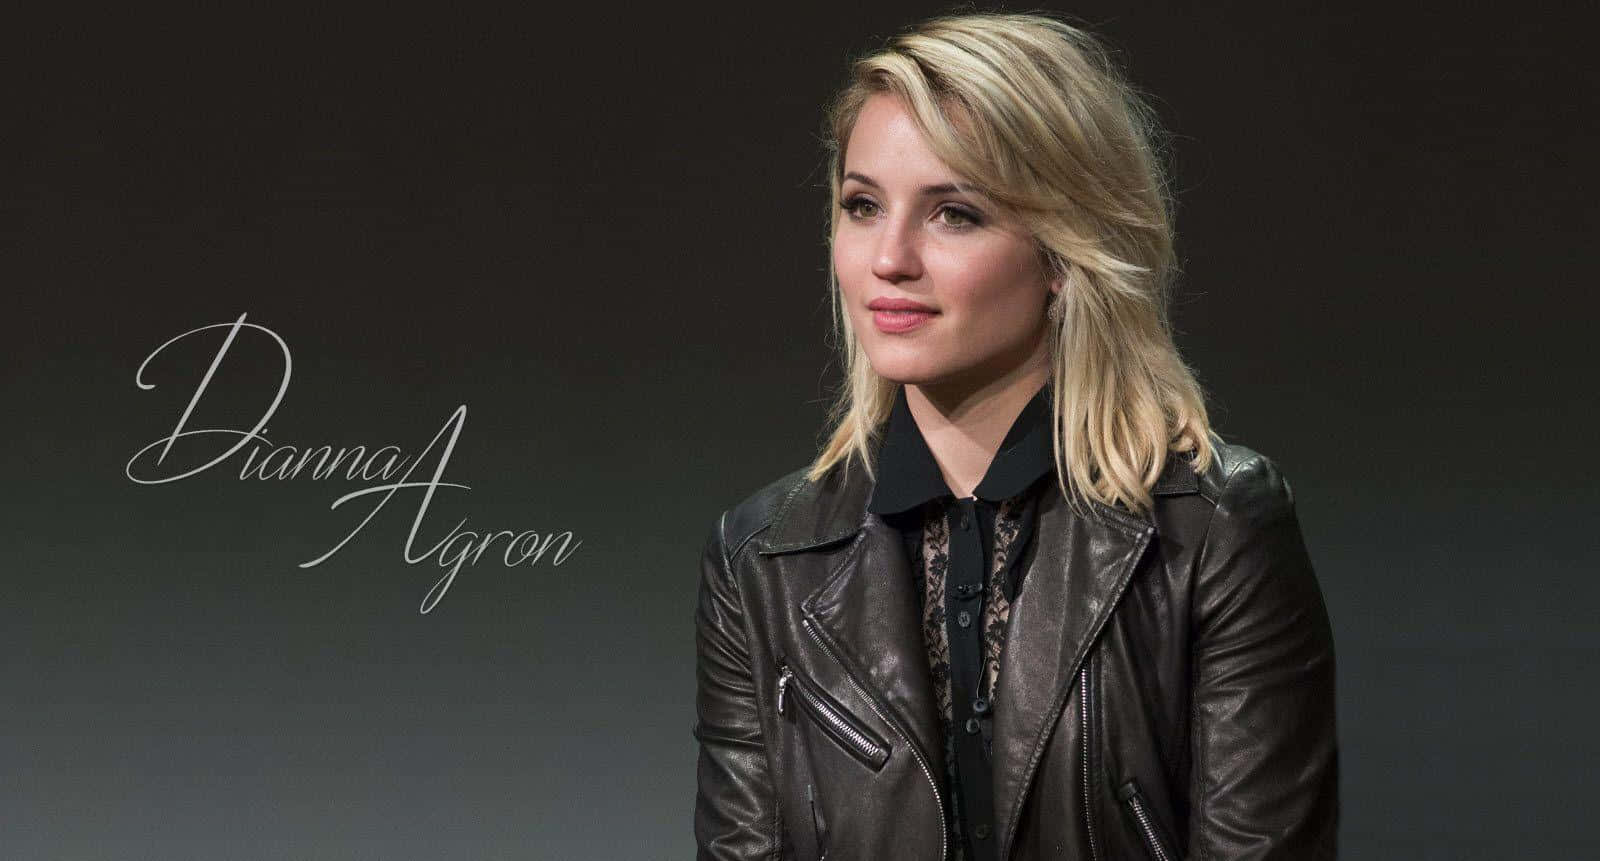 Dianna Agron posing confidently in a stylish outfit Wallpaper